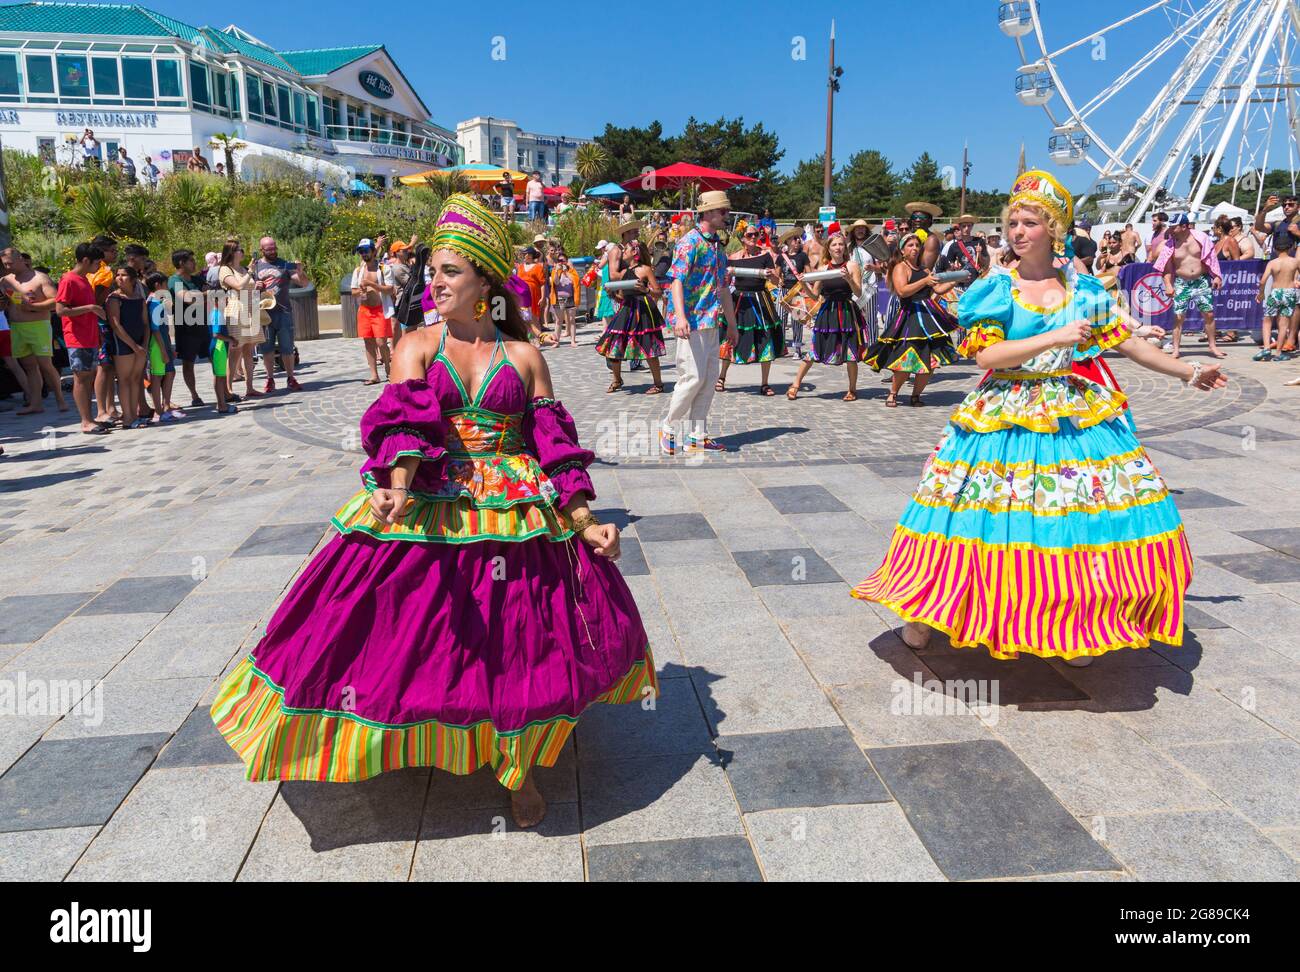 Bournemouth, Dorset, UK. 18th July, 2021. Afon Sistema with their whirling dancers with colourful skirts play Maracatu, Samba's earthier cousin from Northeastern Brazilas perform as part of the Arts by the Sea Summer Series on a hot sunny crowded day at the seaside. Credit: Carolyn Jenkins/Alamy Live News Stock Photo